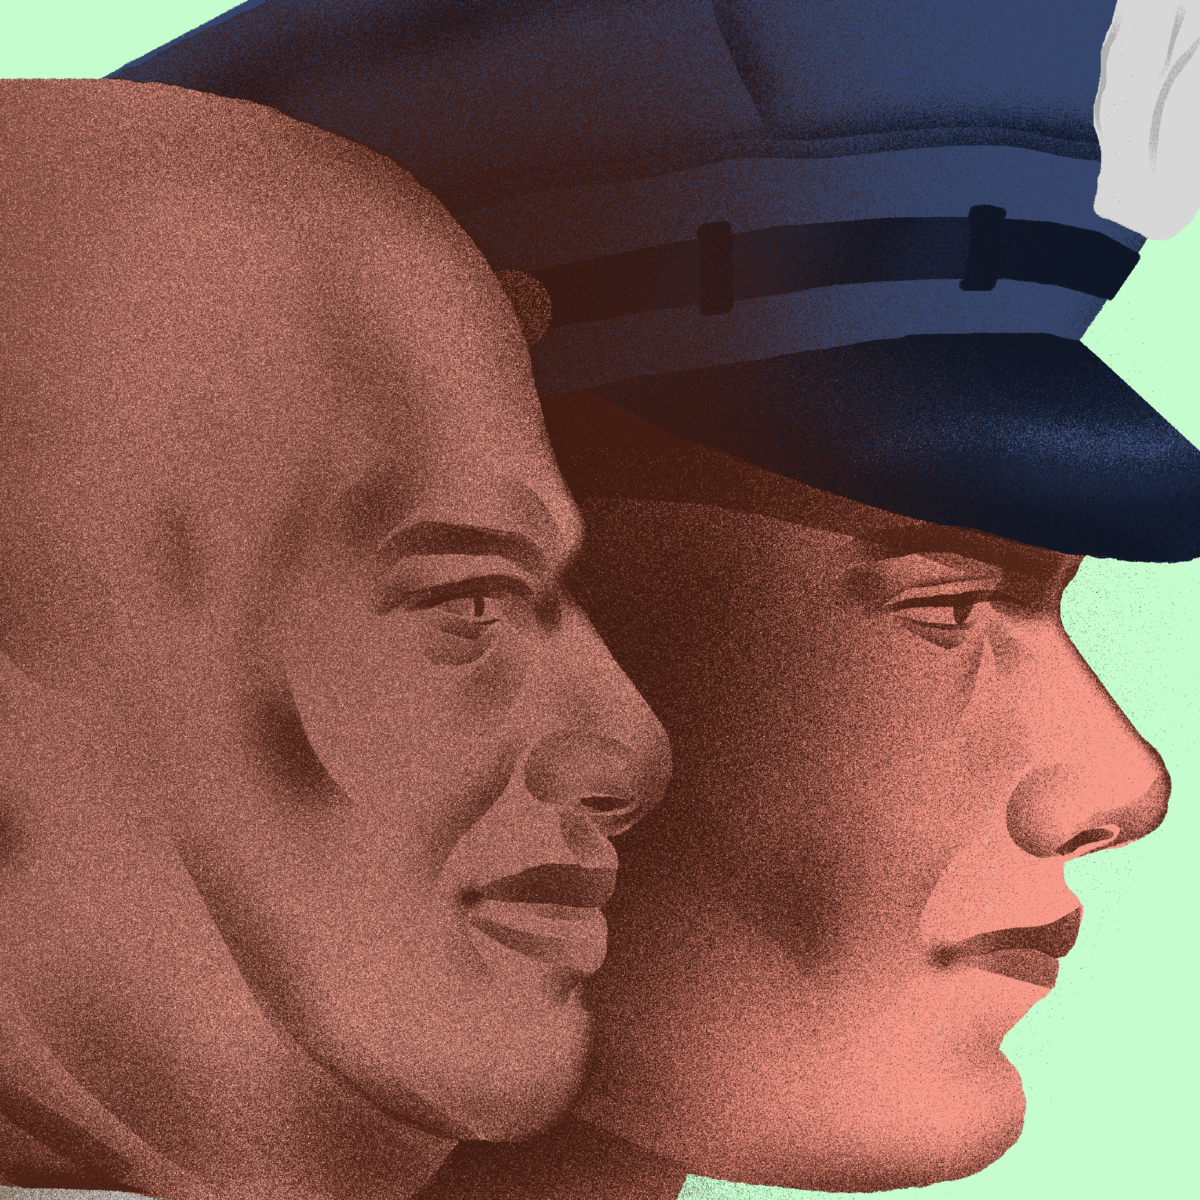 illustration of police man's face next to DA's face